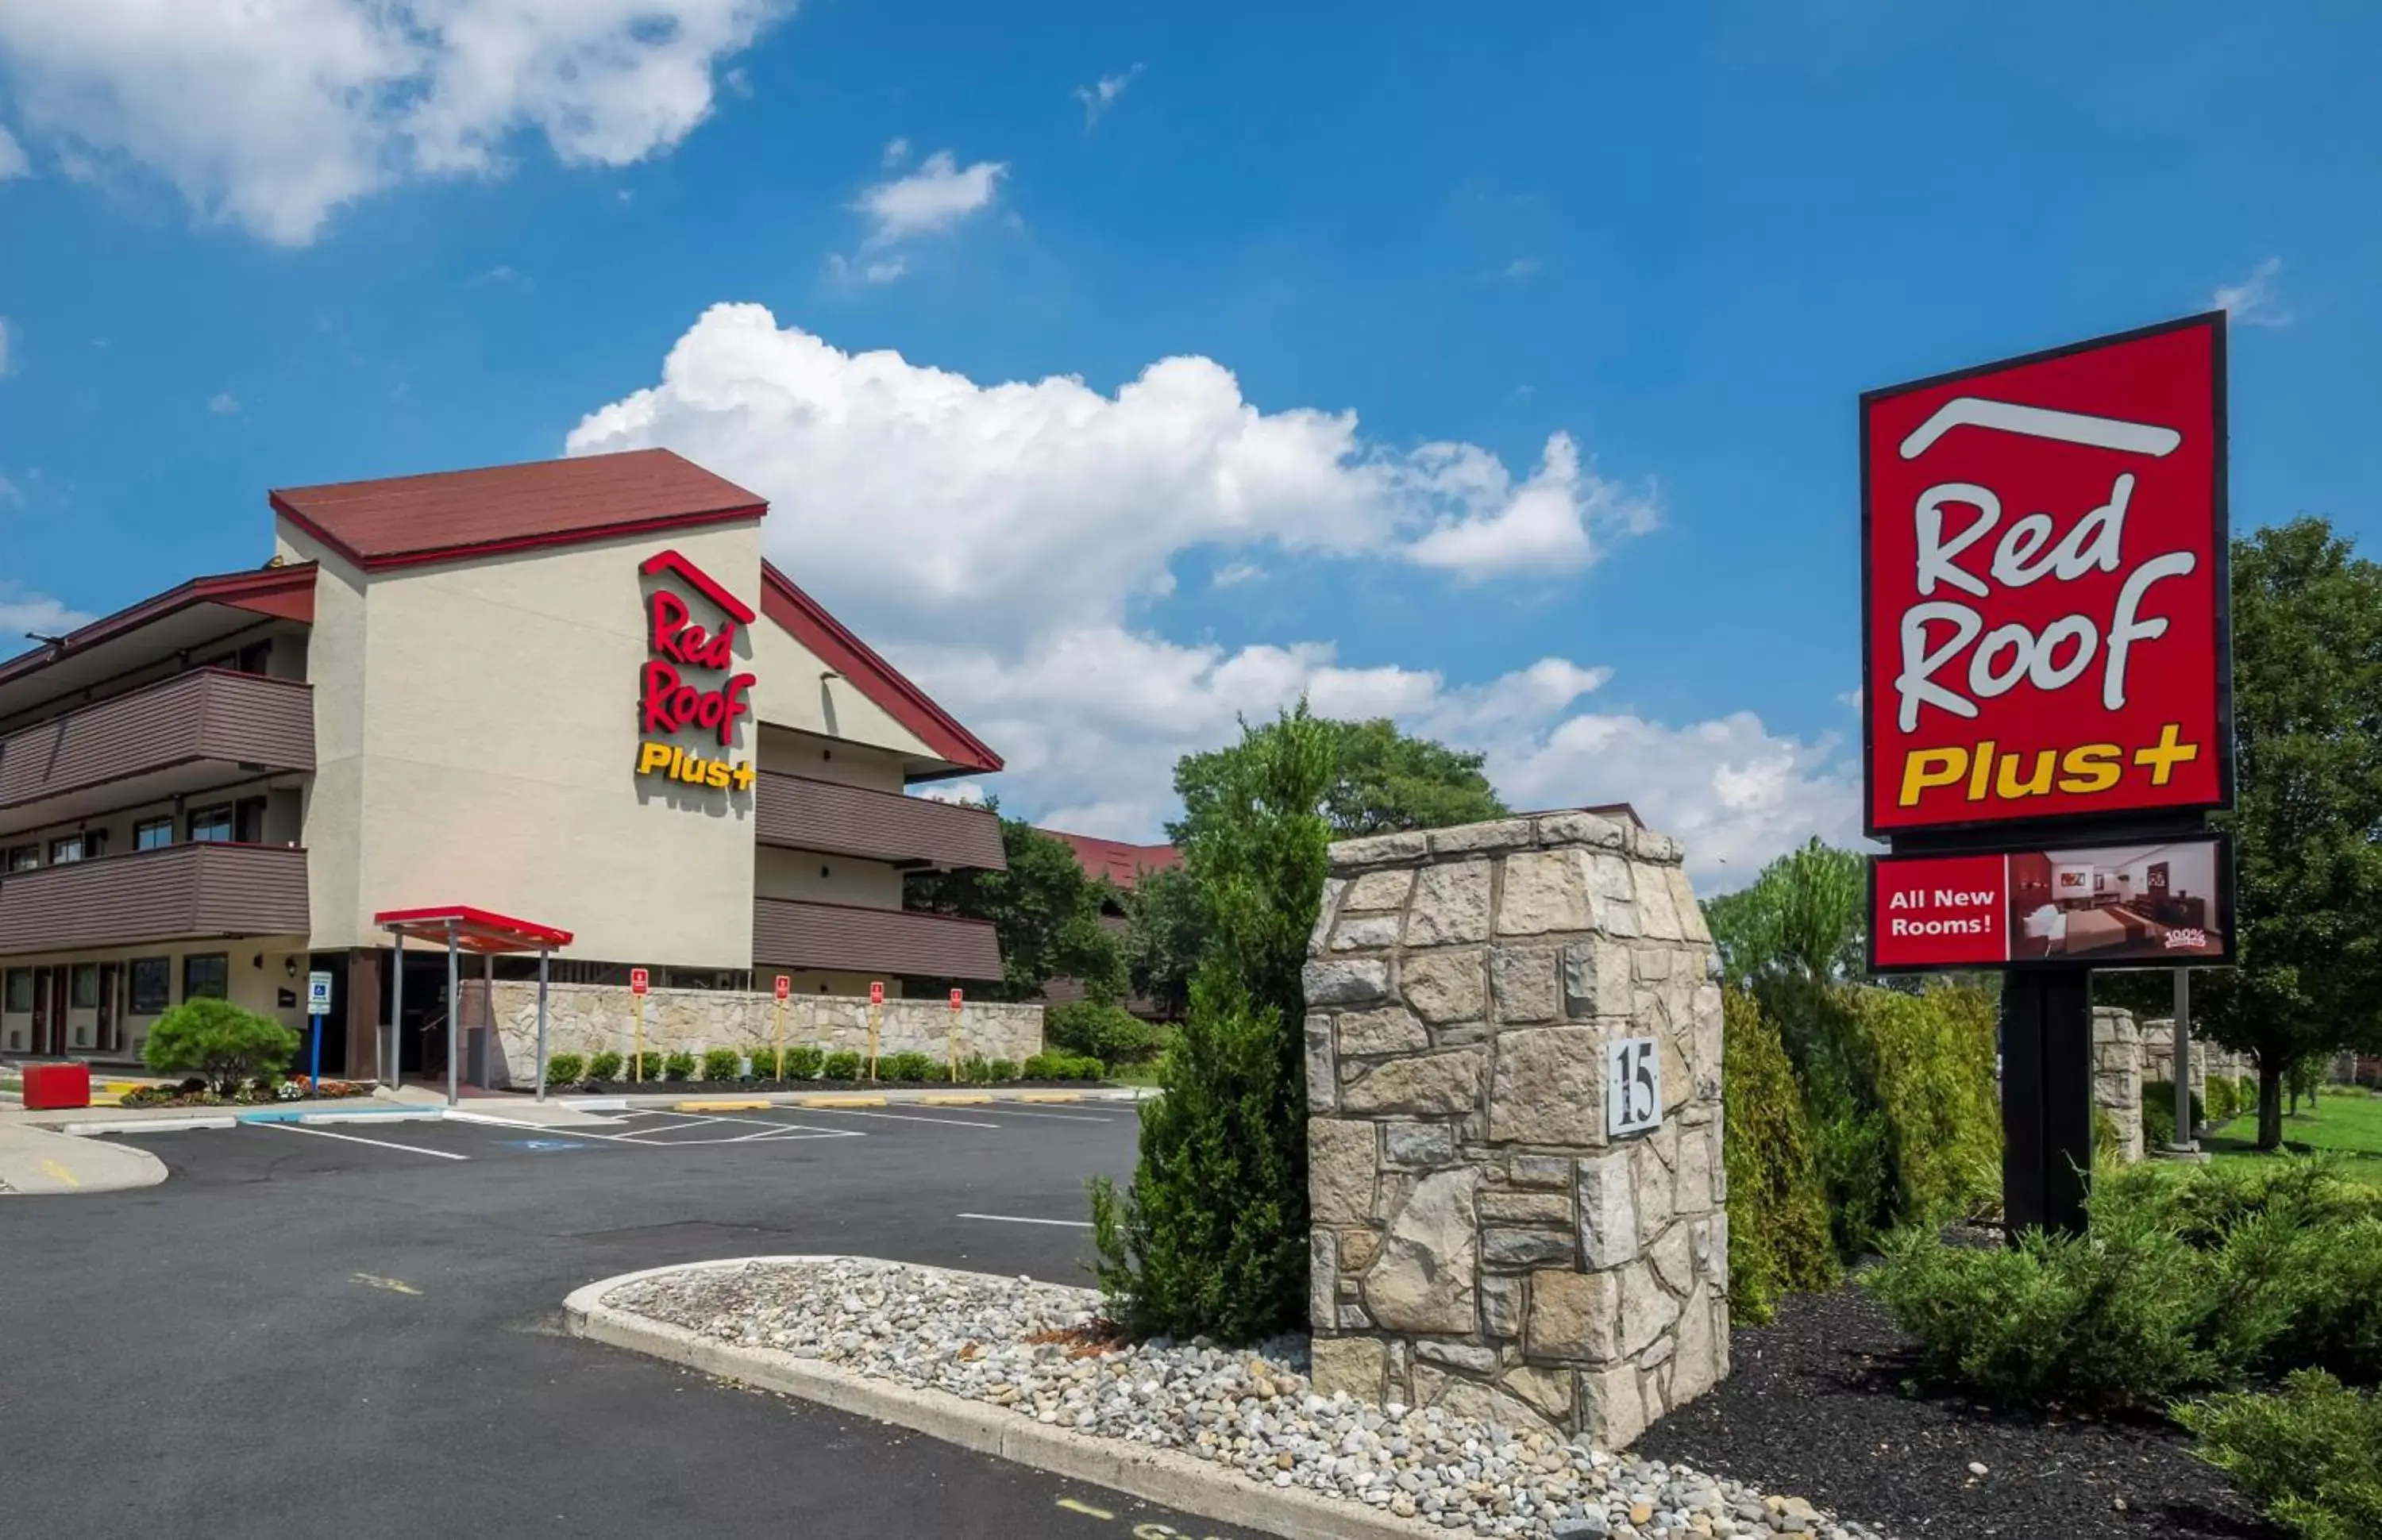 Property building, Facade/Entrance in Red Roof Inn PLUS+ Secaucus - Meadowlands